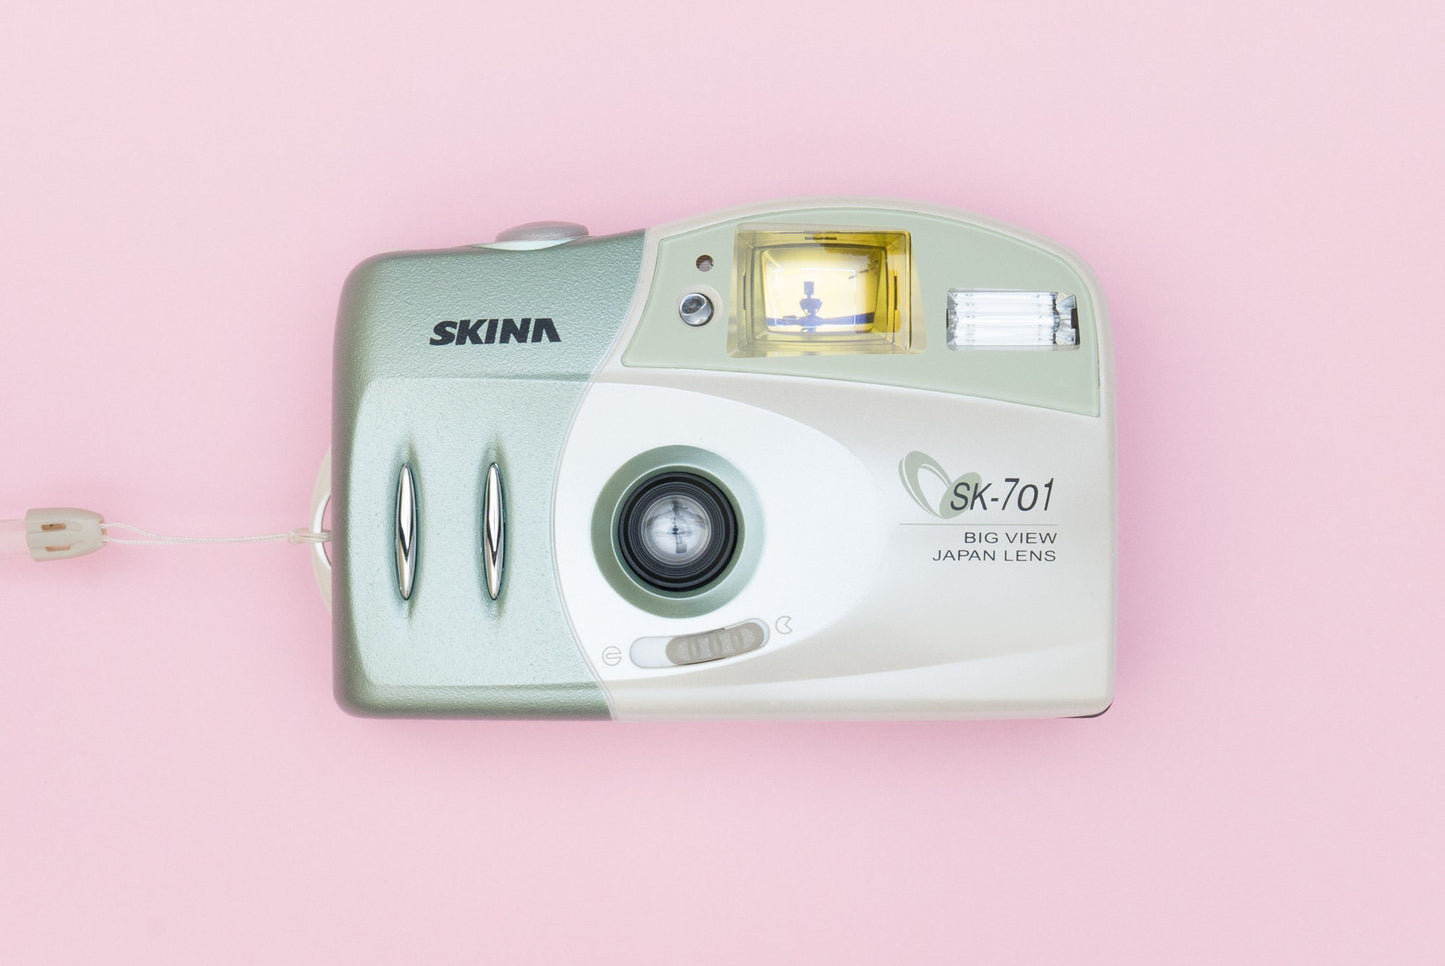 Skina SK-701 Big View Compact 35mm Point and Shoot Film Camera